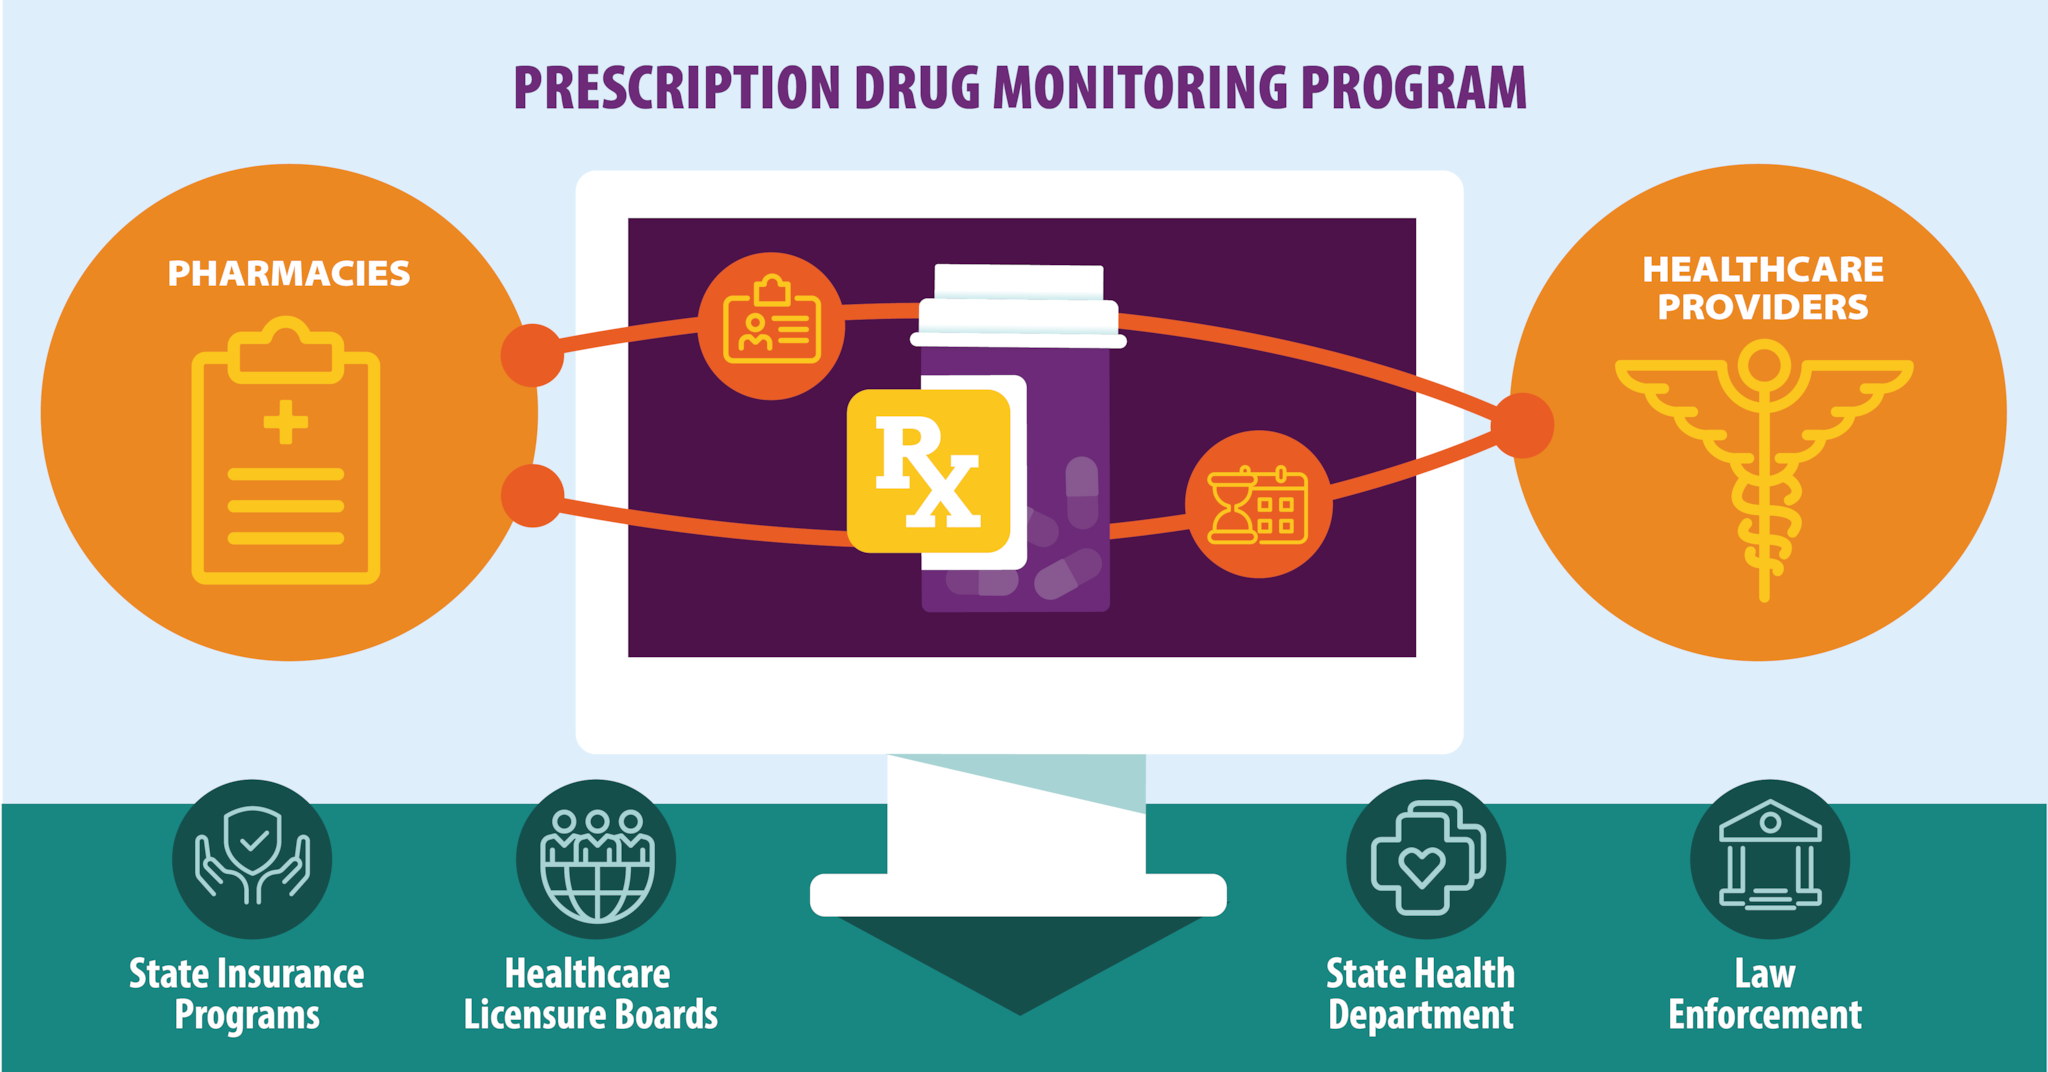 Prescription Drug Monitoring Program. Graphic shows pharmacies and healthcare providers accessing an online database.